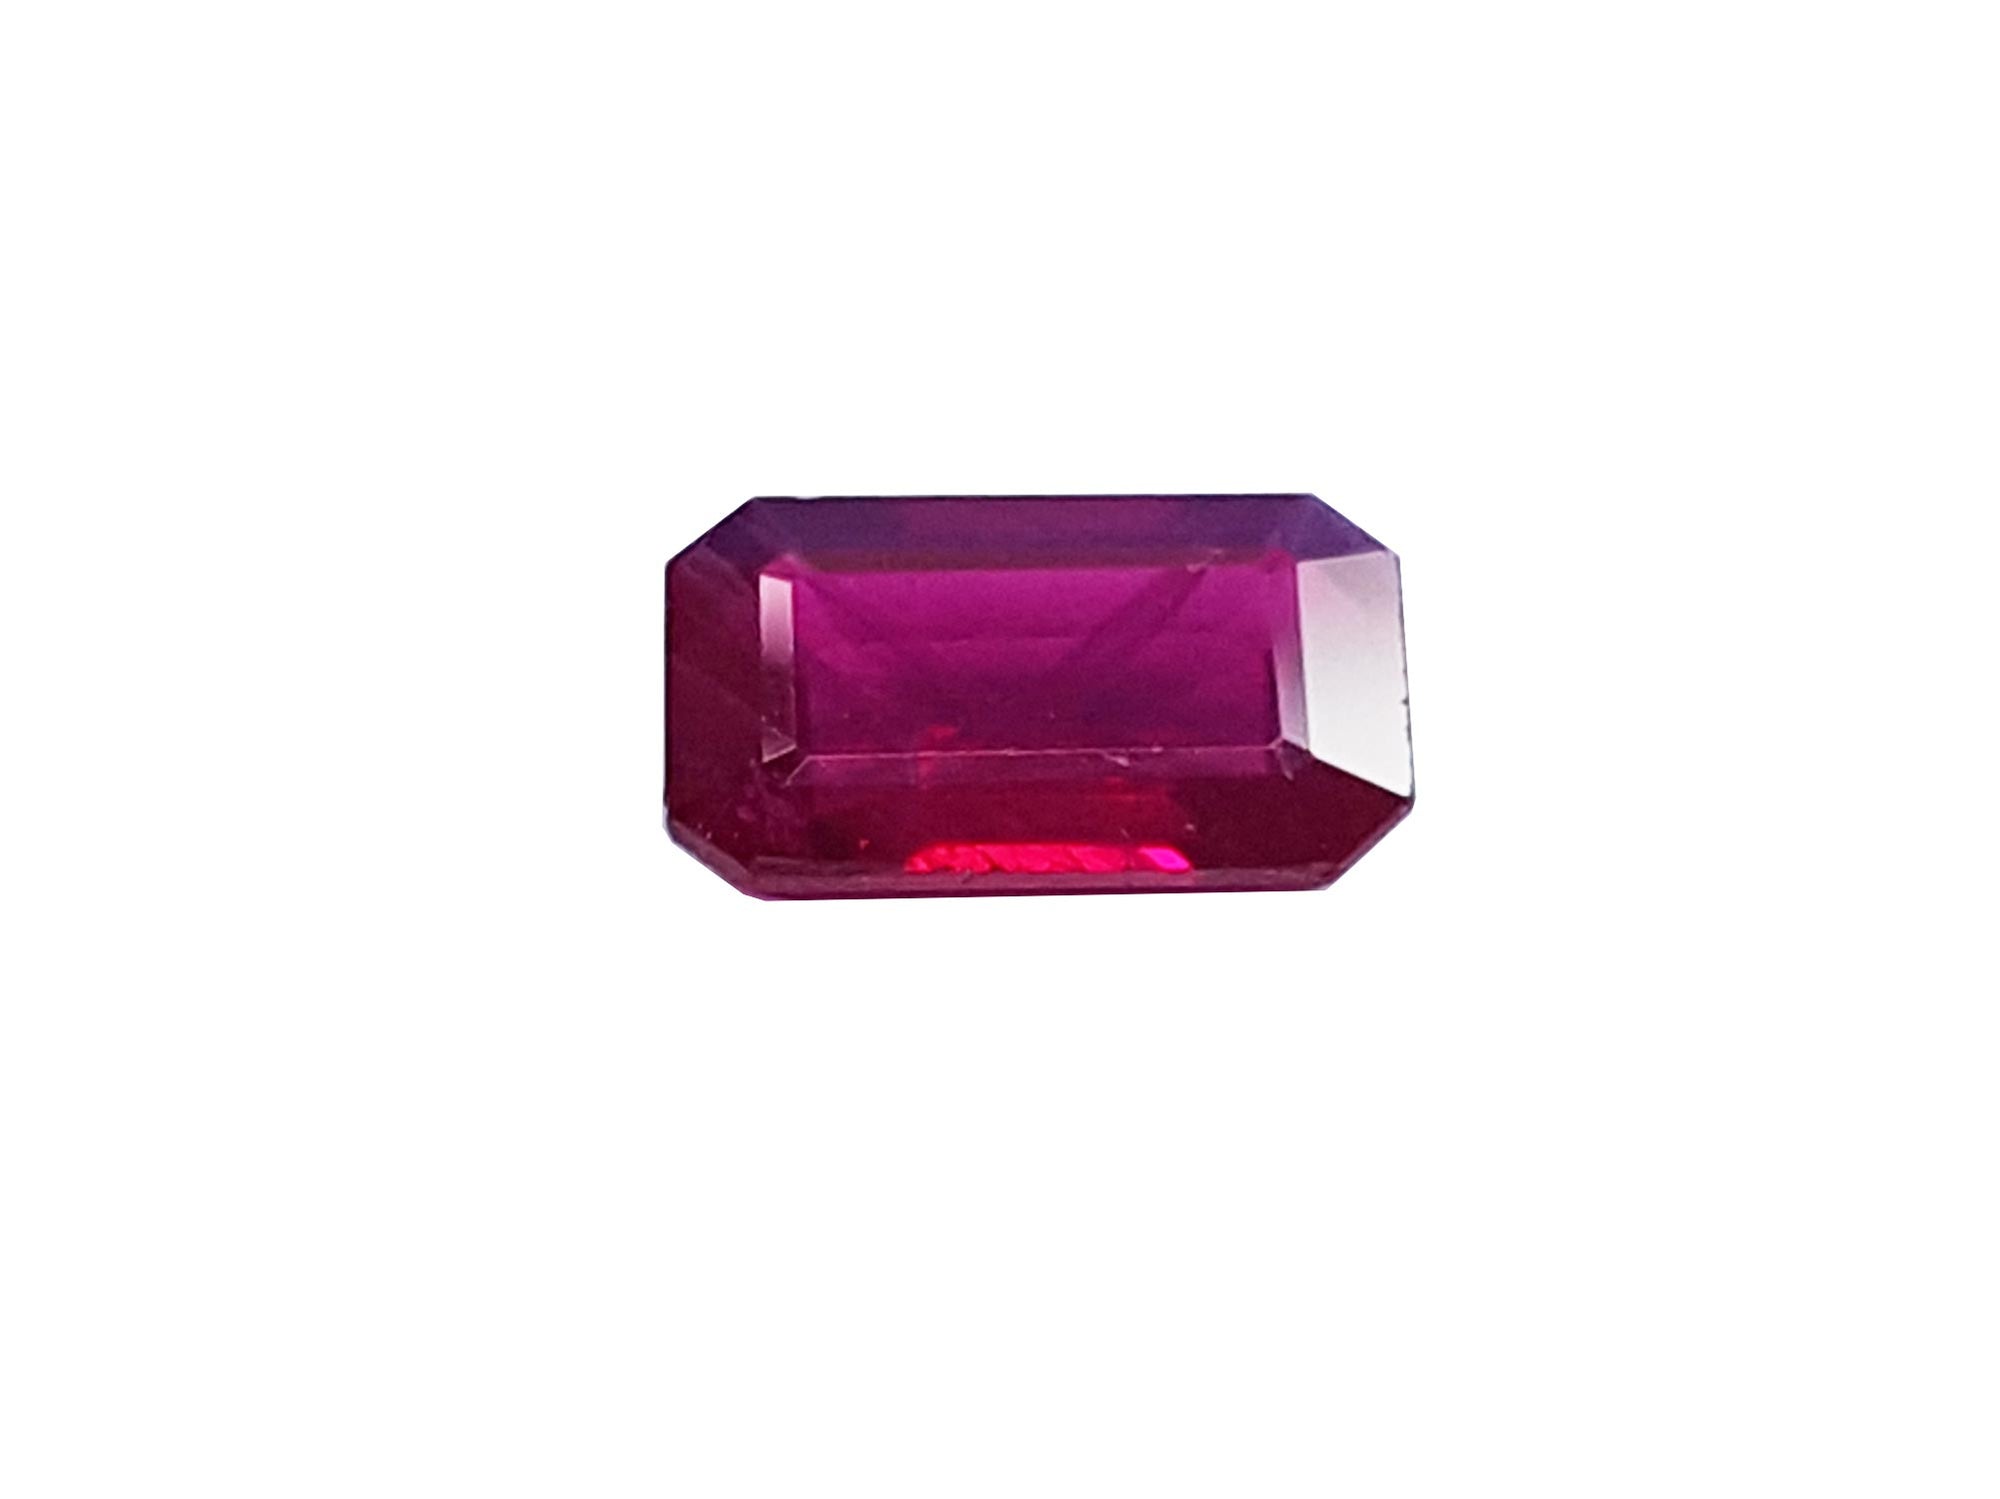 Loose ruby for sale